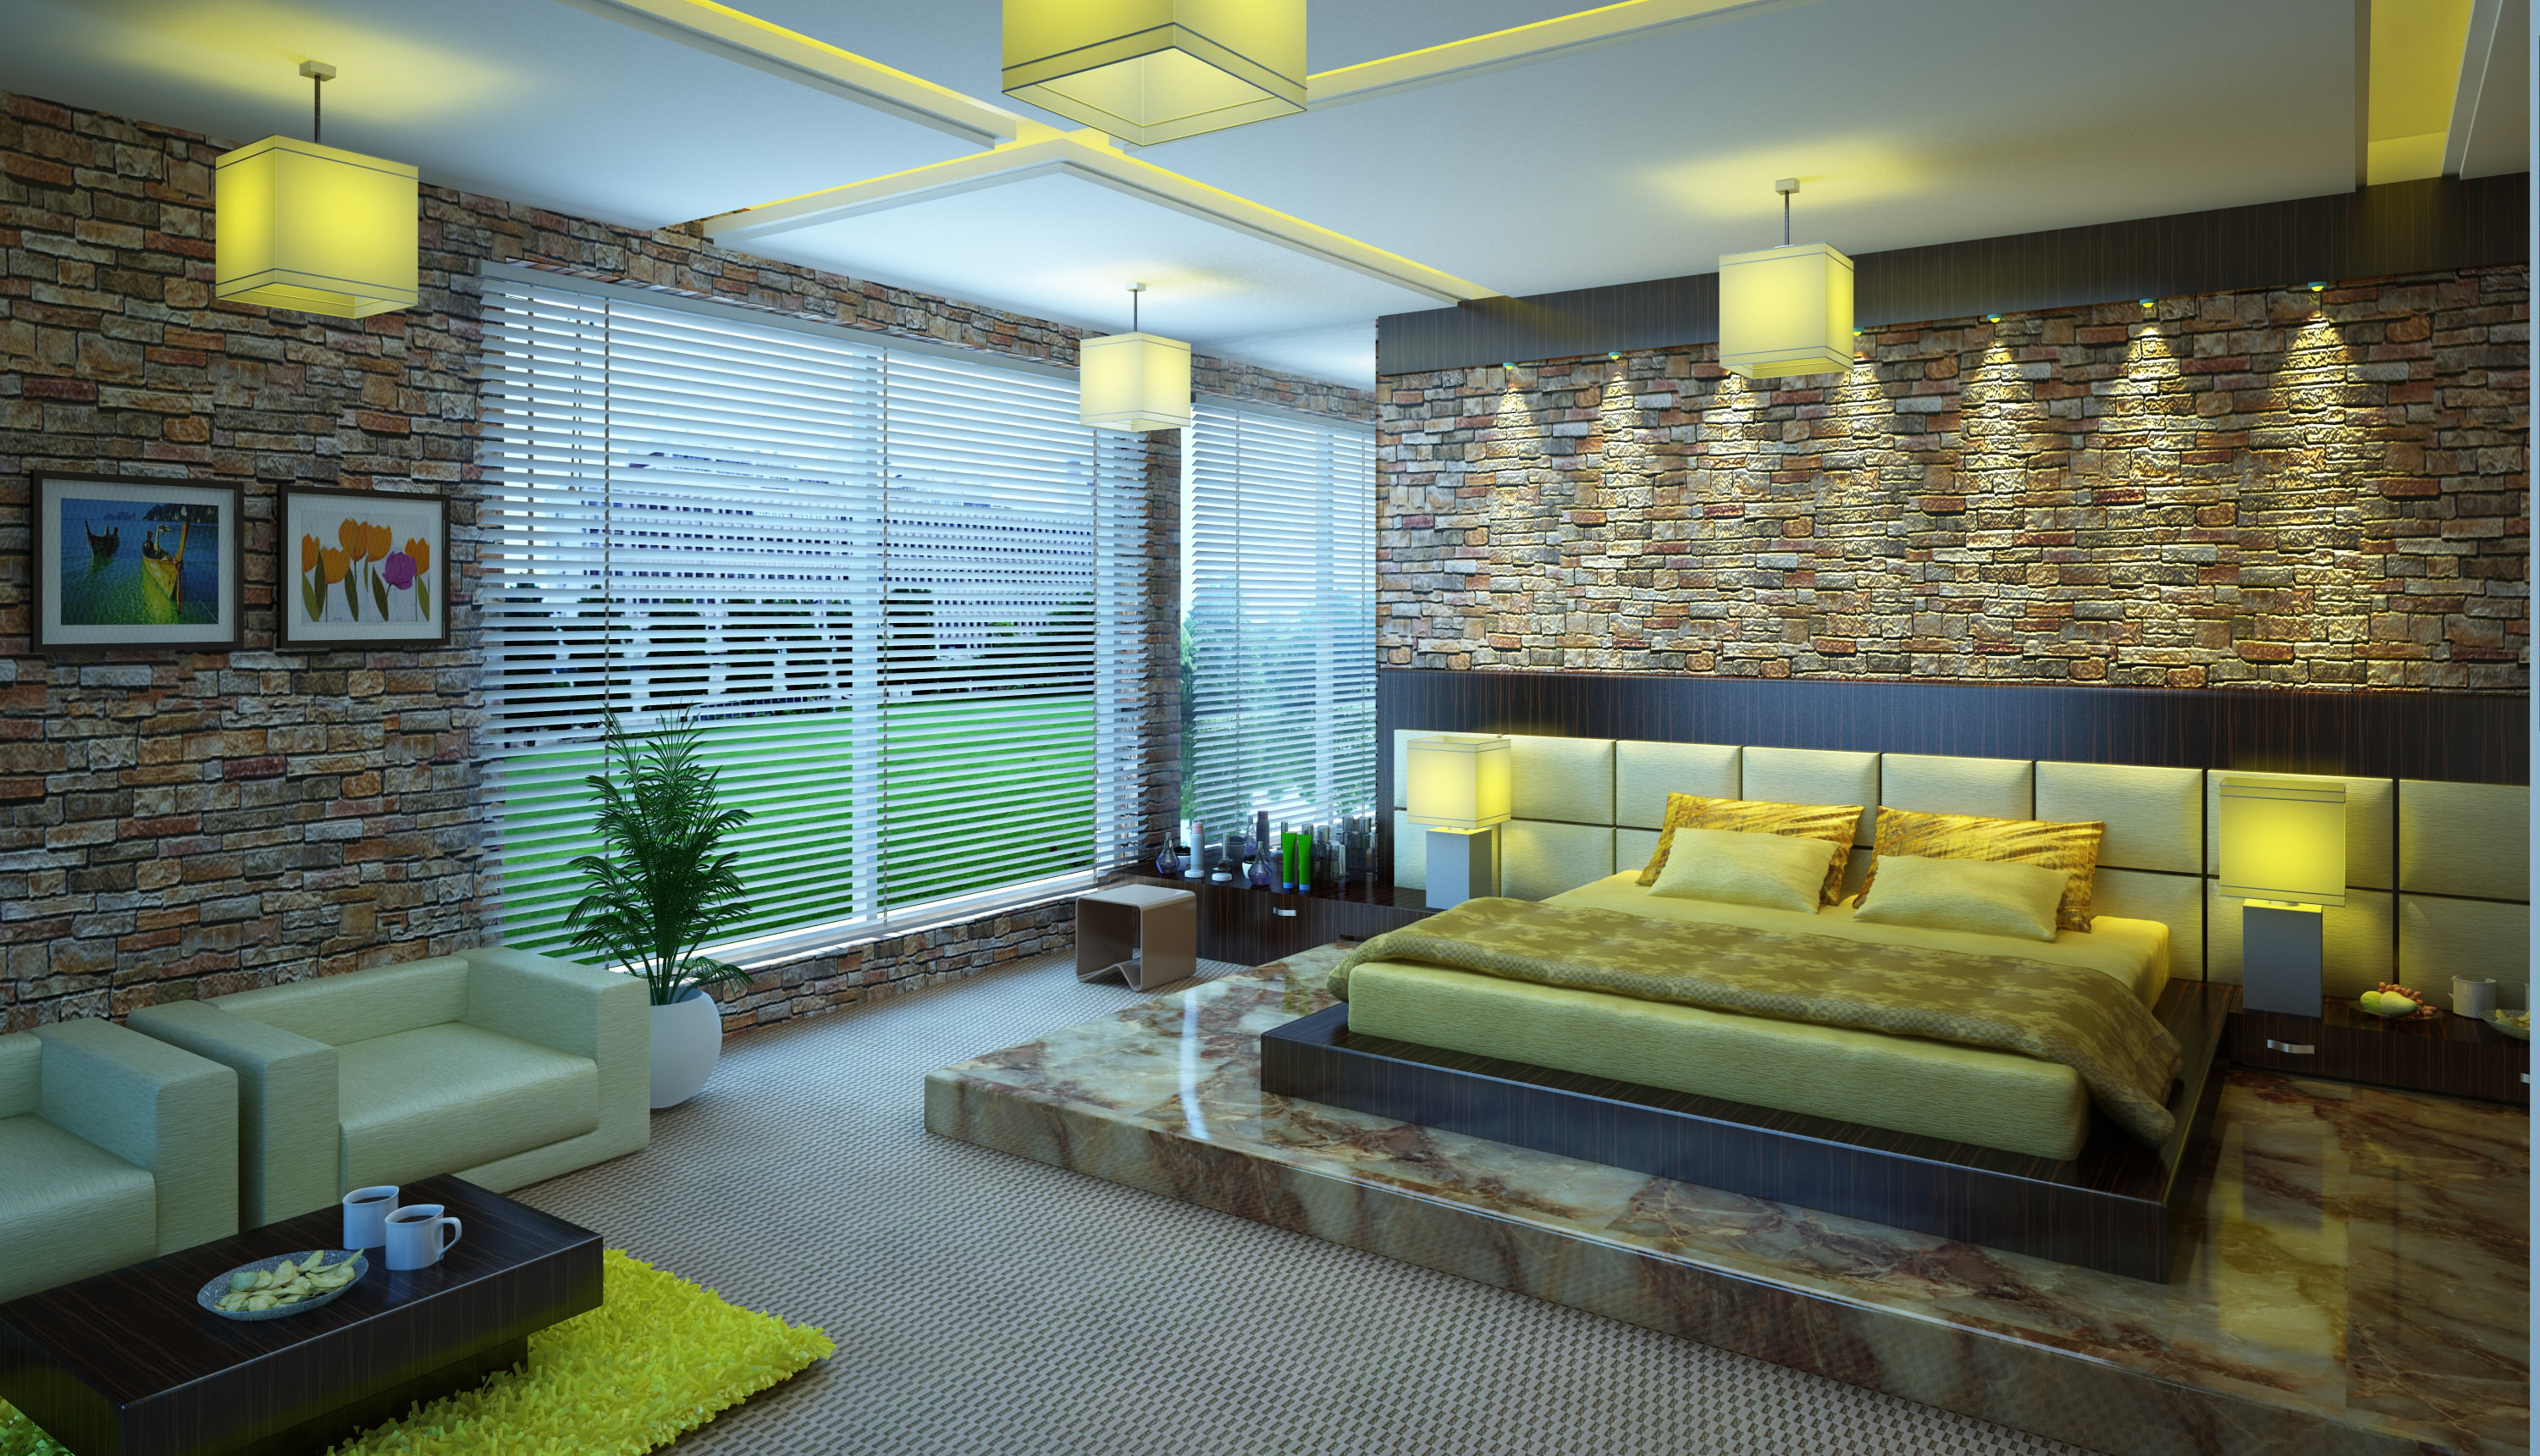 design, house, style, room, interior, apartment, 3ds max, bedroom